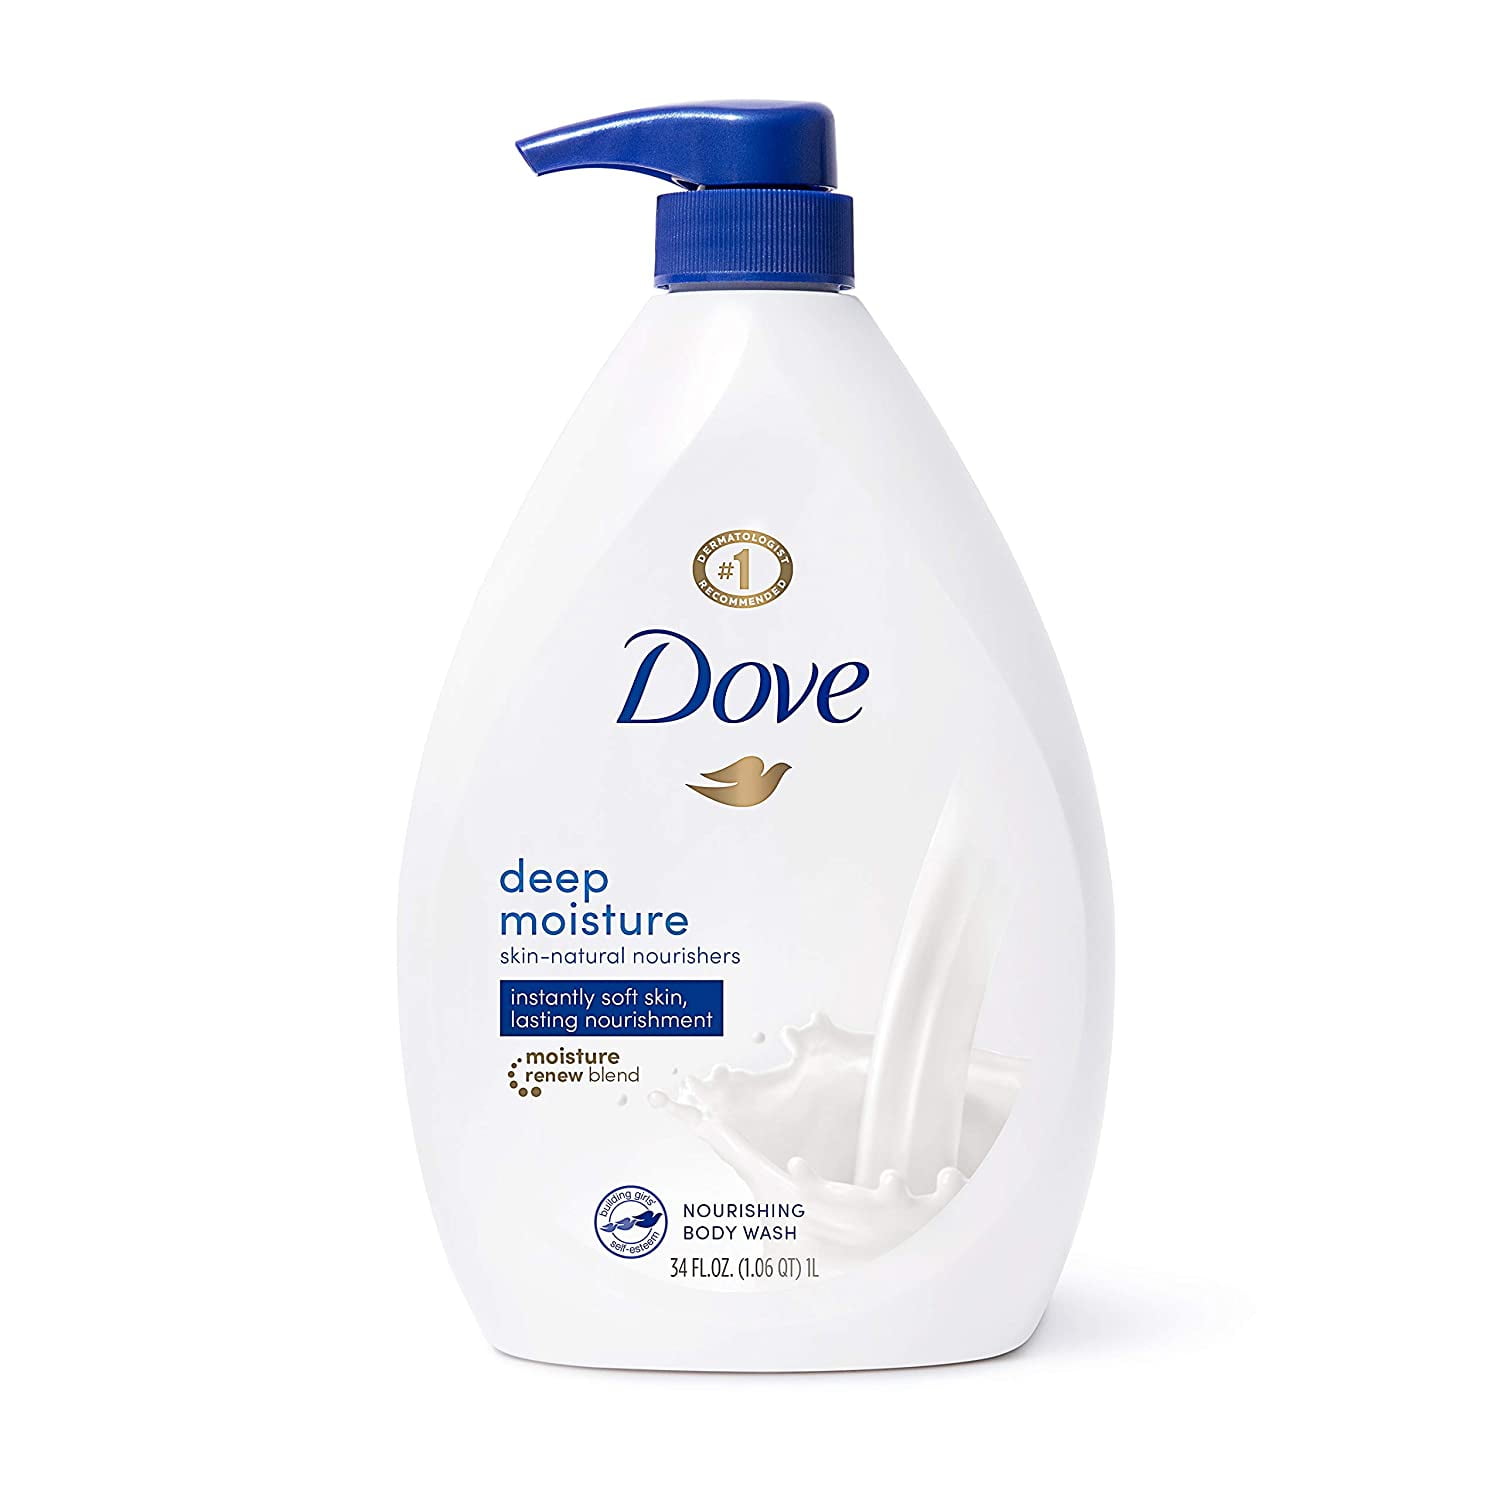 Dove Body Wash with Pump with Skin Natural Nourishers for Instantly Soft Skin and Lasting